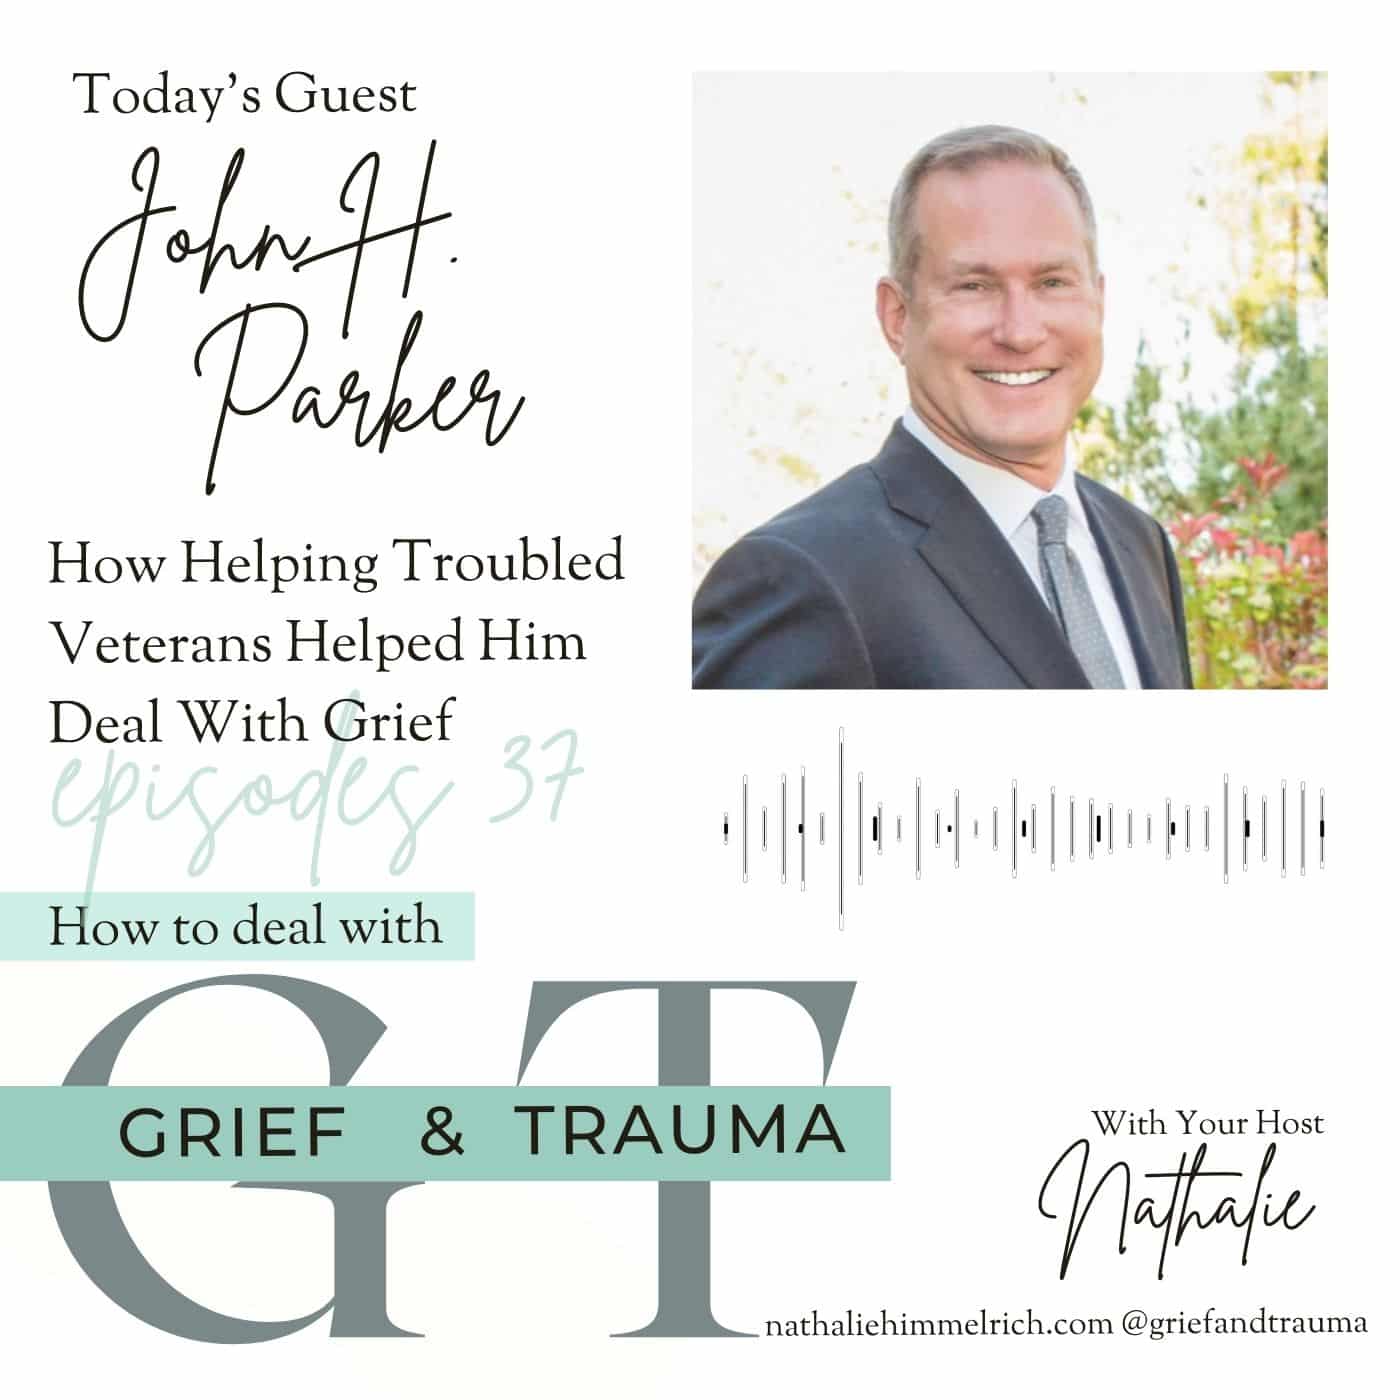 John Henry Parker on How Helping Troubled Veterans Helped Him Deal With Grief | Episode 37